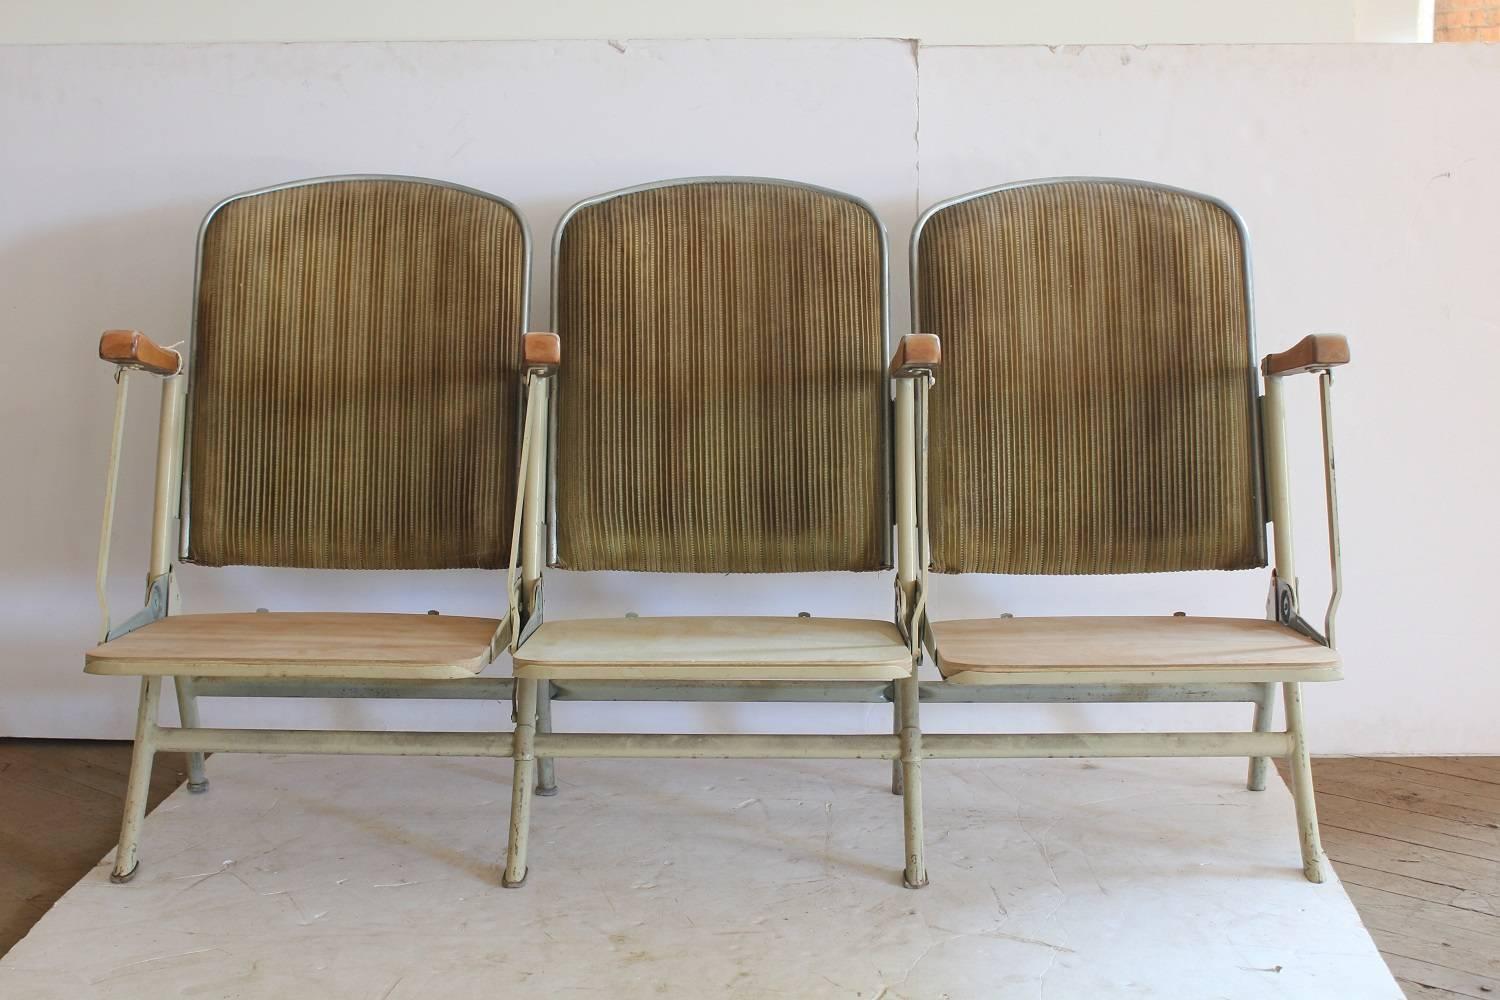 1920s American stadium three-seat bench. We have two benches in stock.